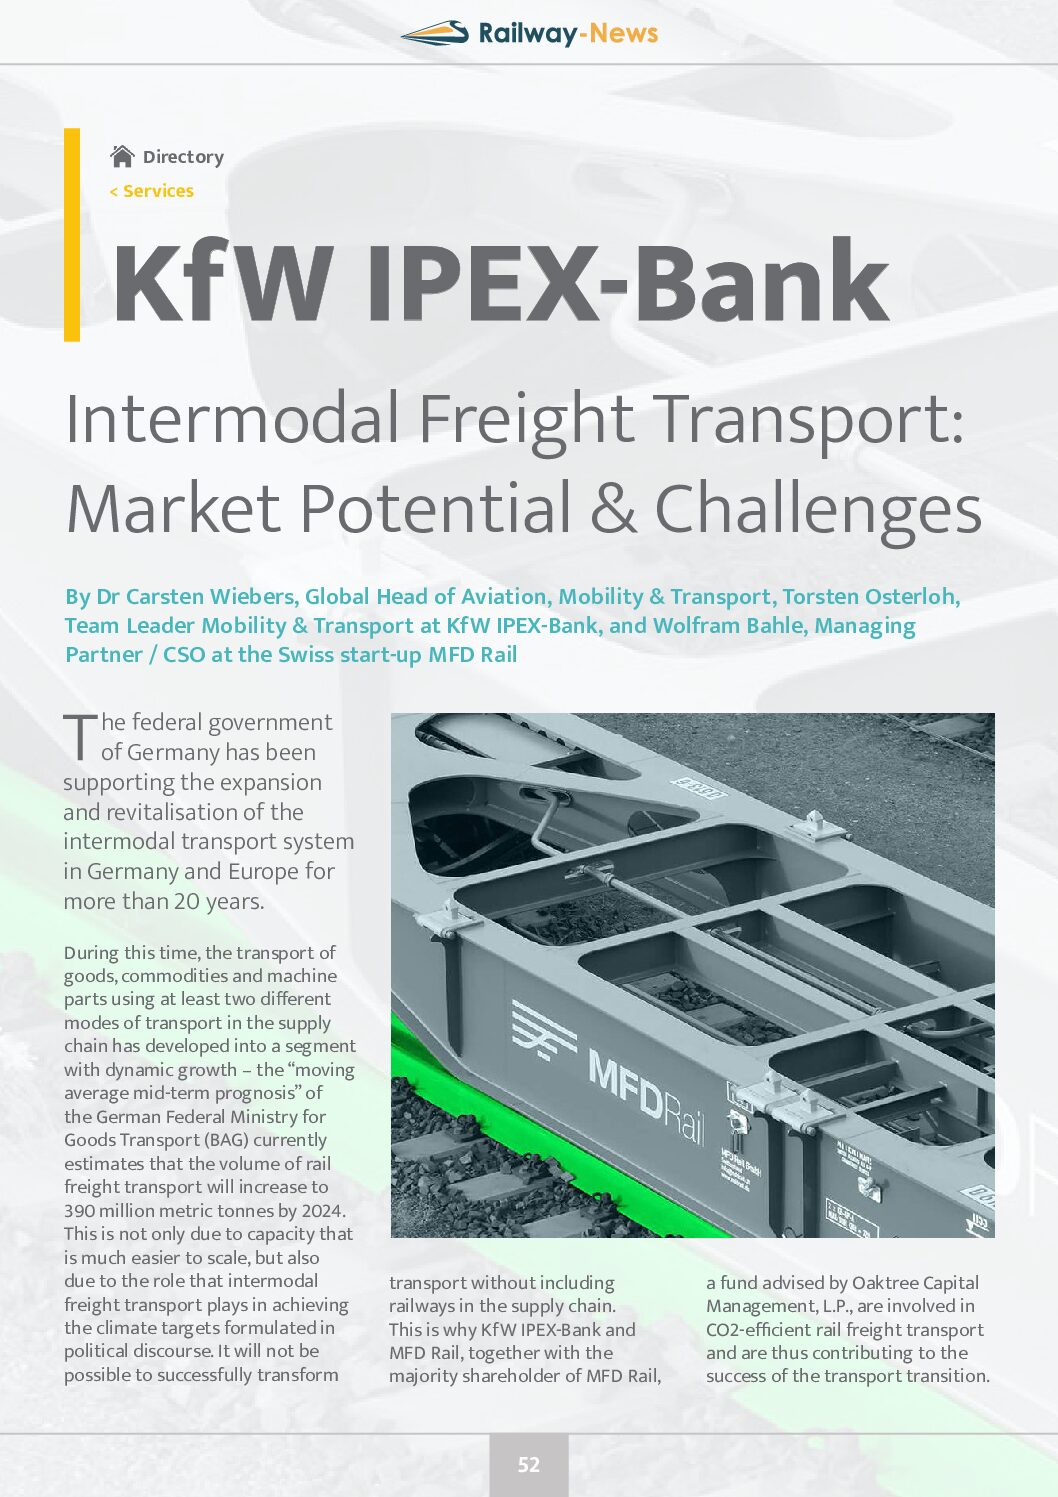 KfW IPEX-Bank – Indermodal Freight Transport